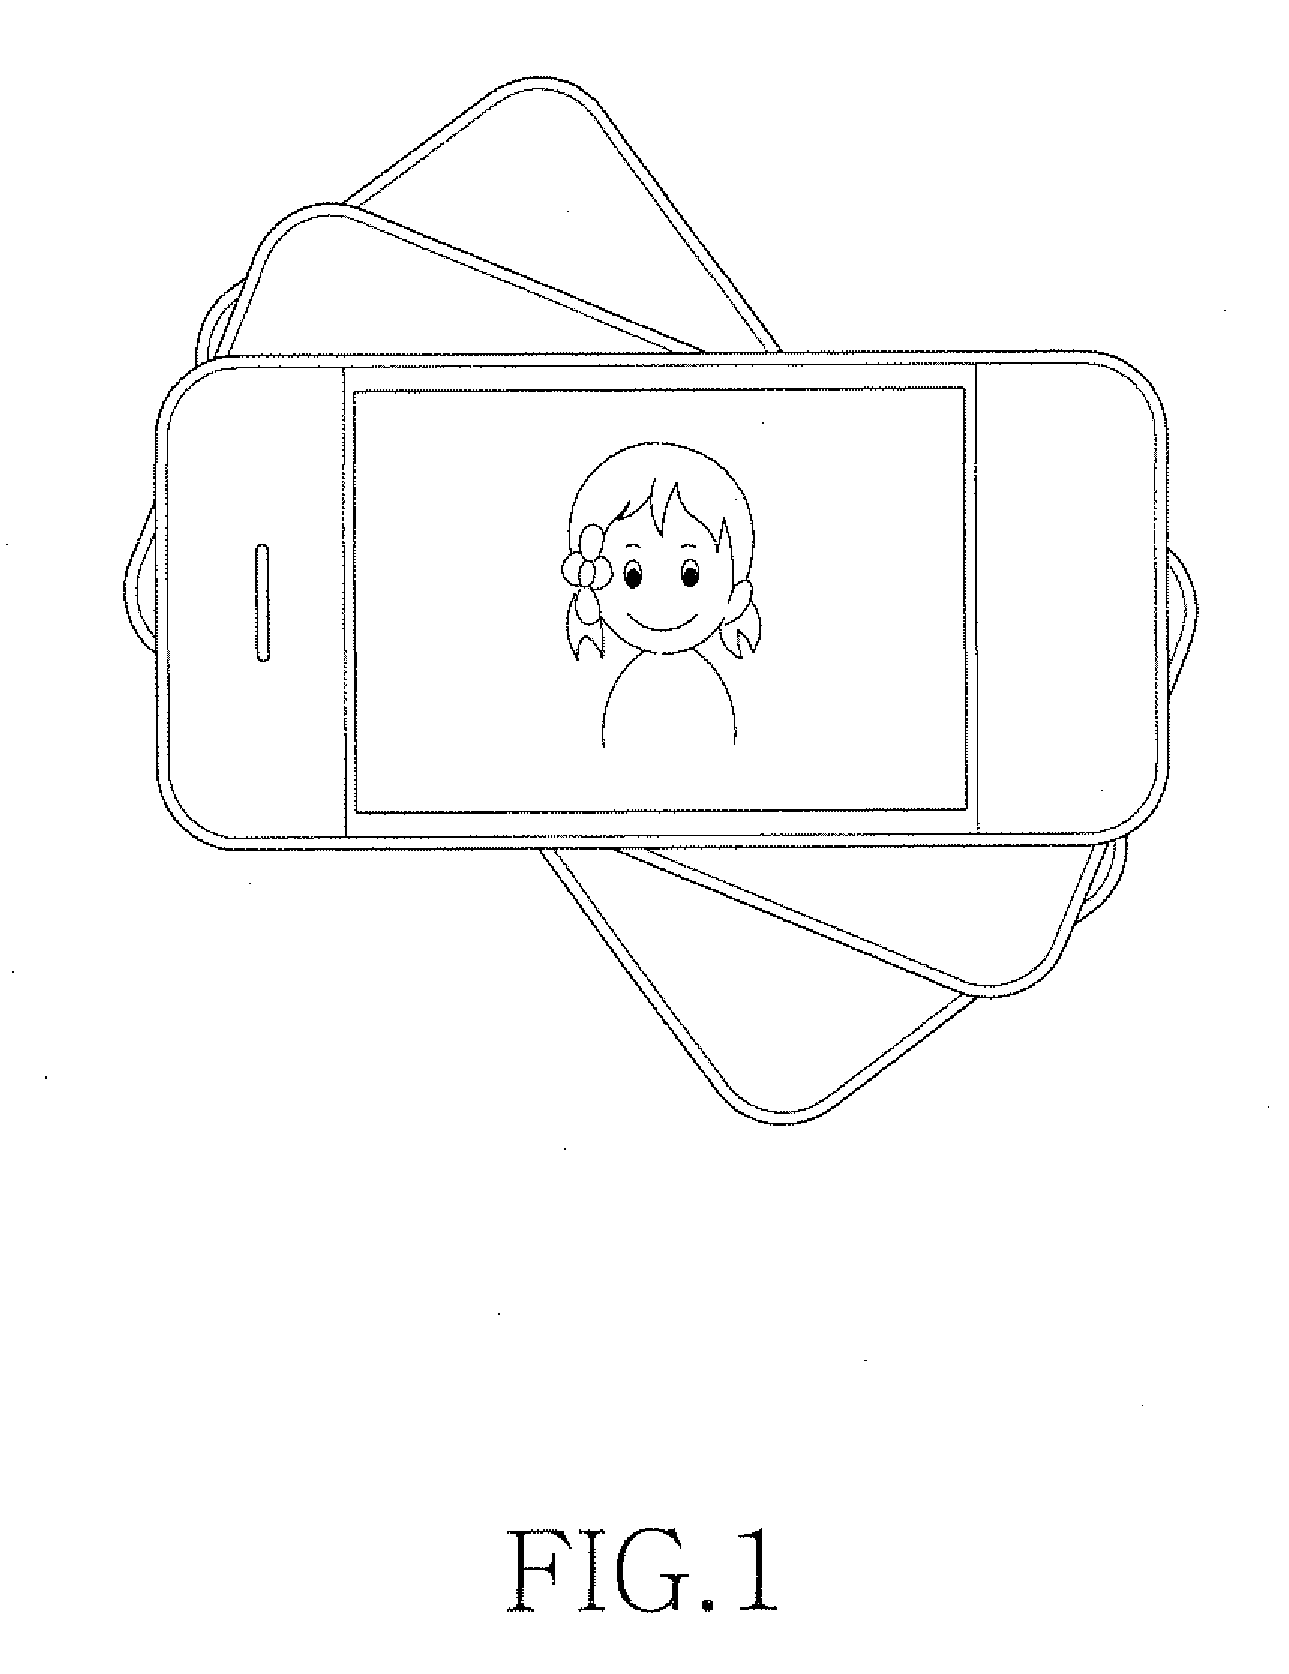 Portable electronic device adapted to change operation mode